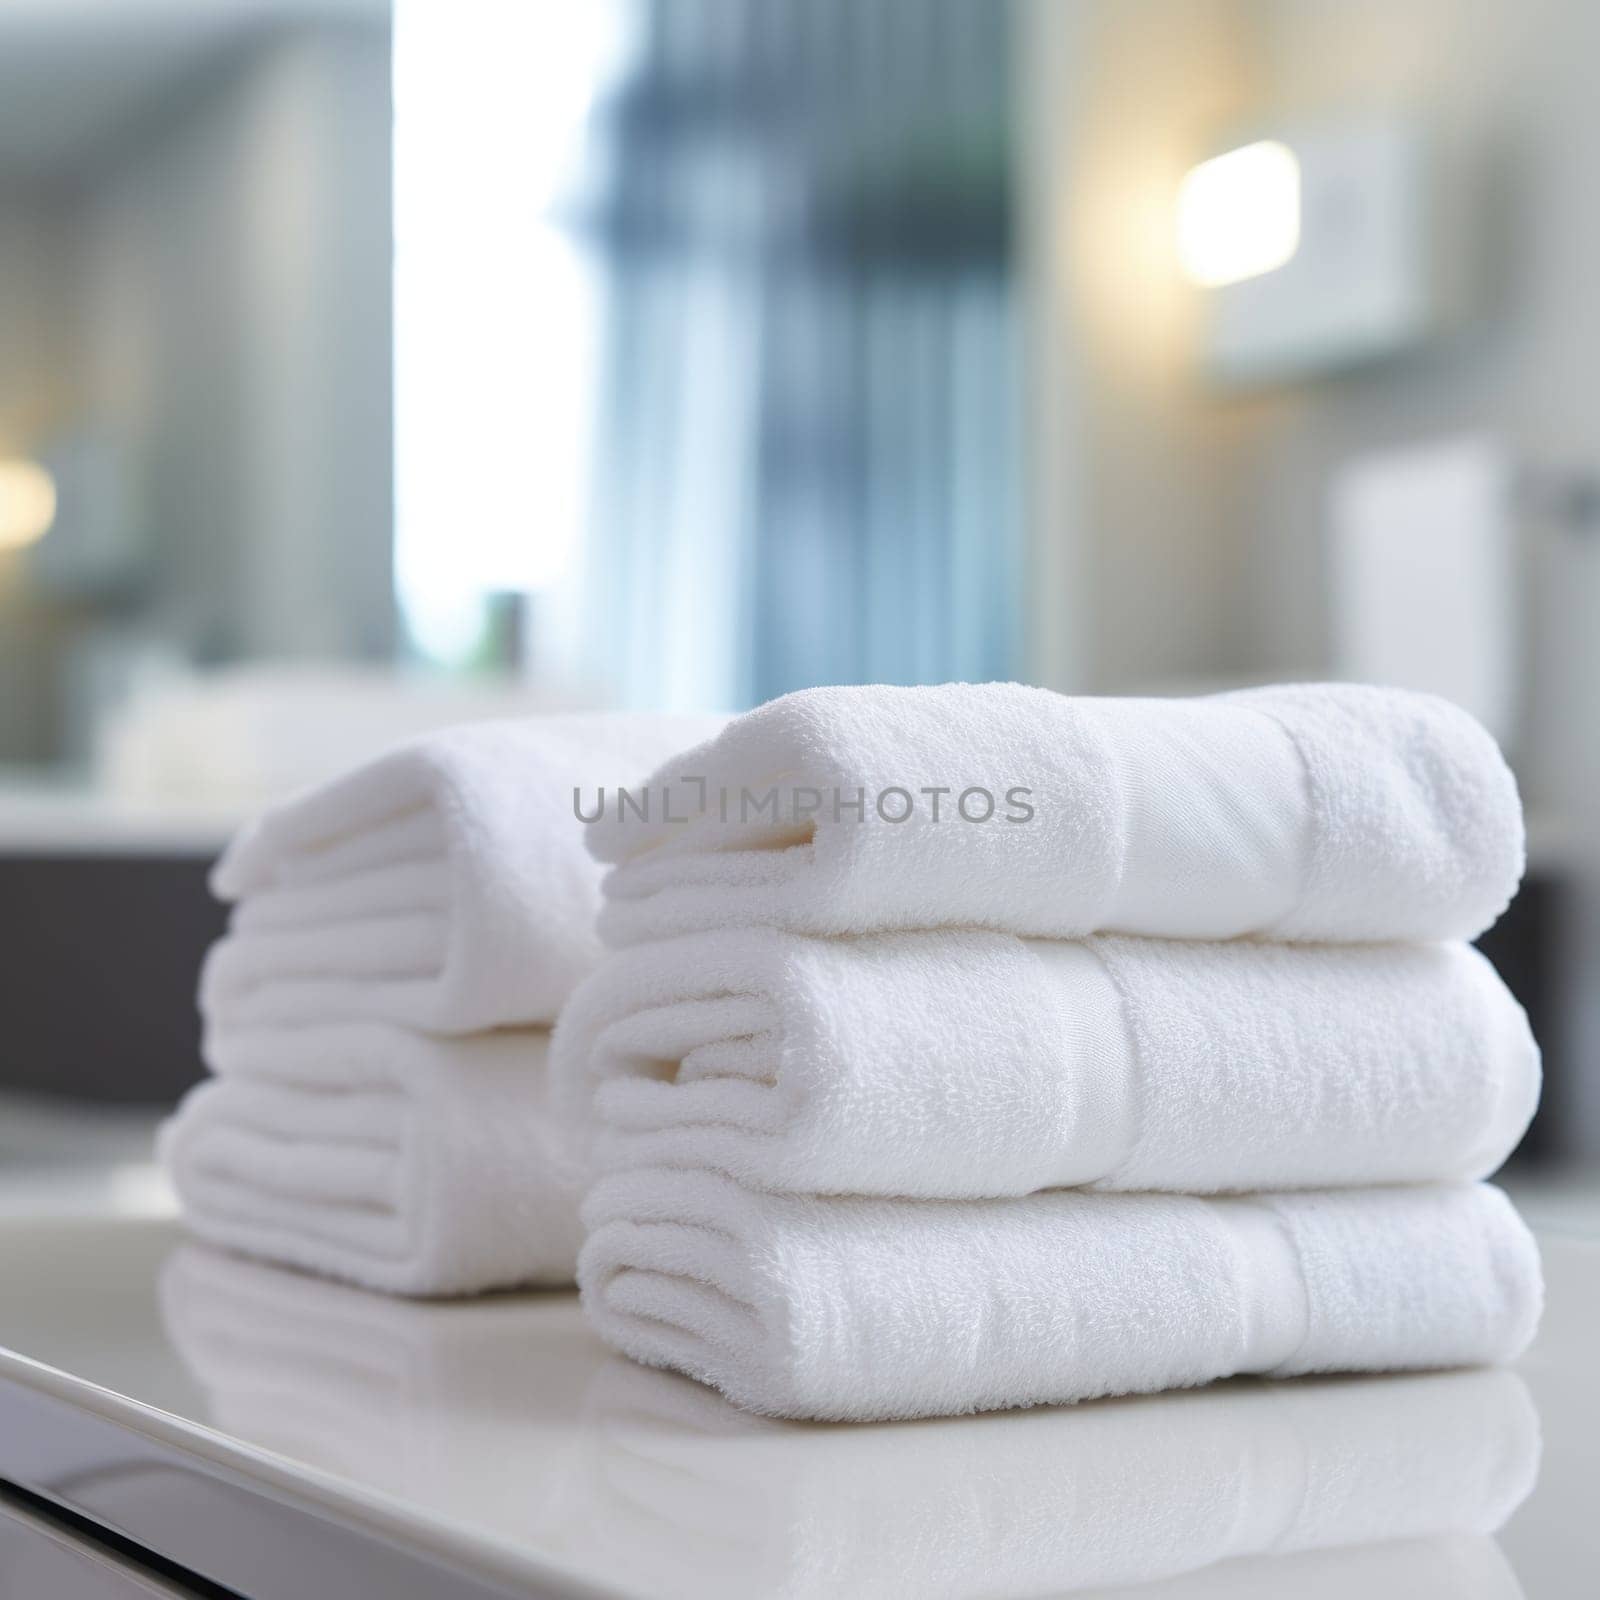 A stack of white towels on a counter, AI by starush